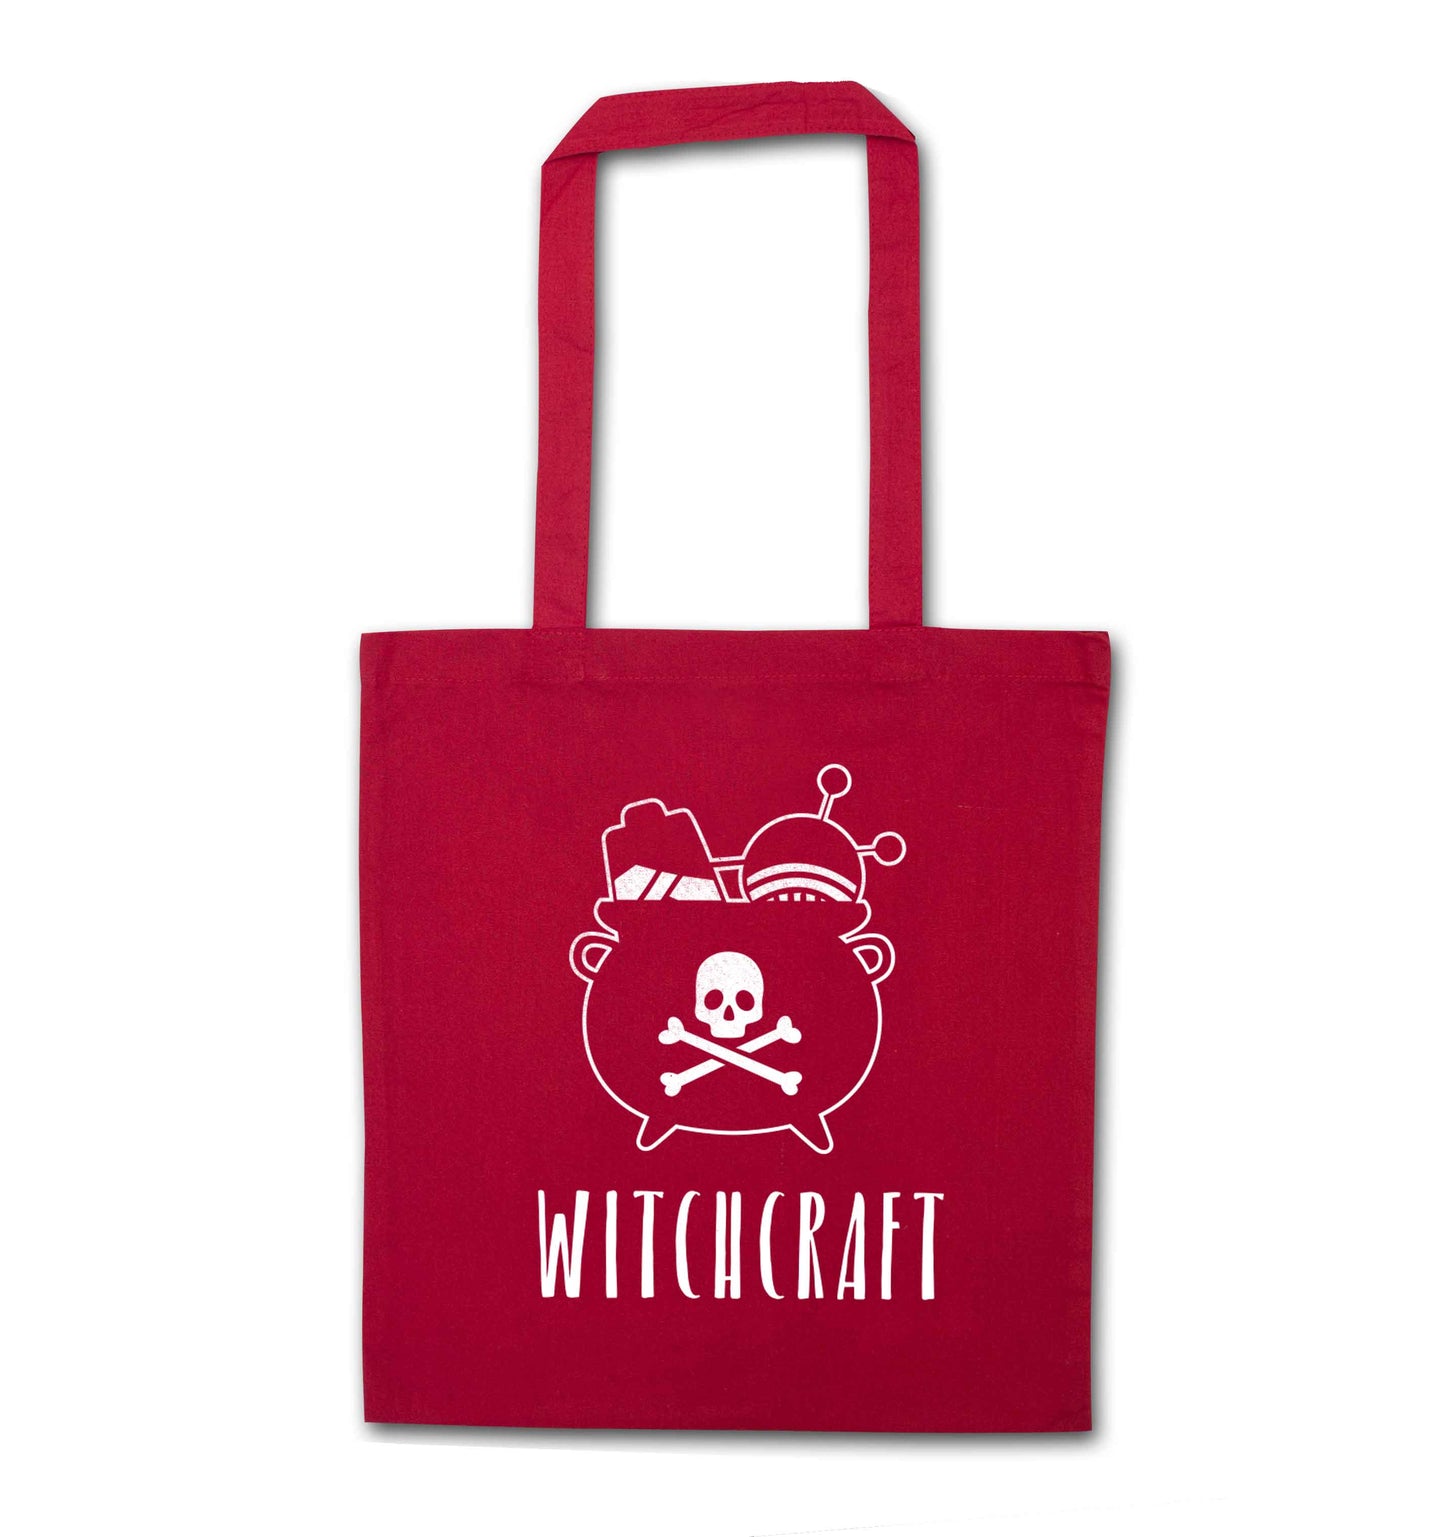 Witchcraft red tote bag